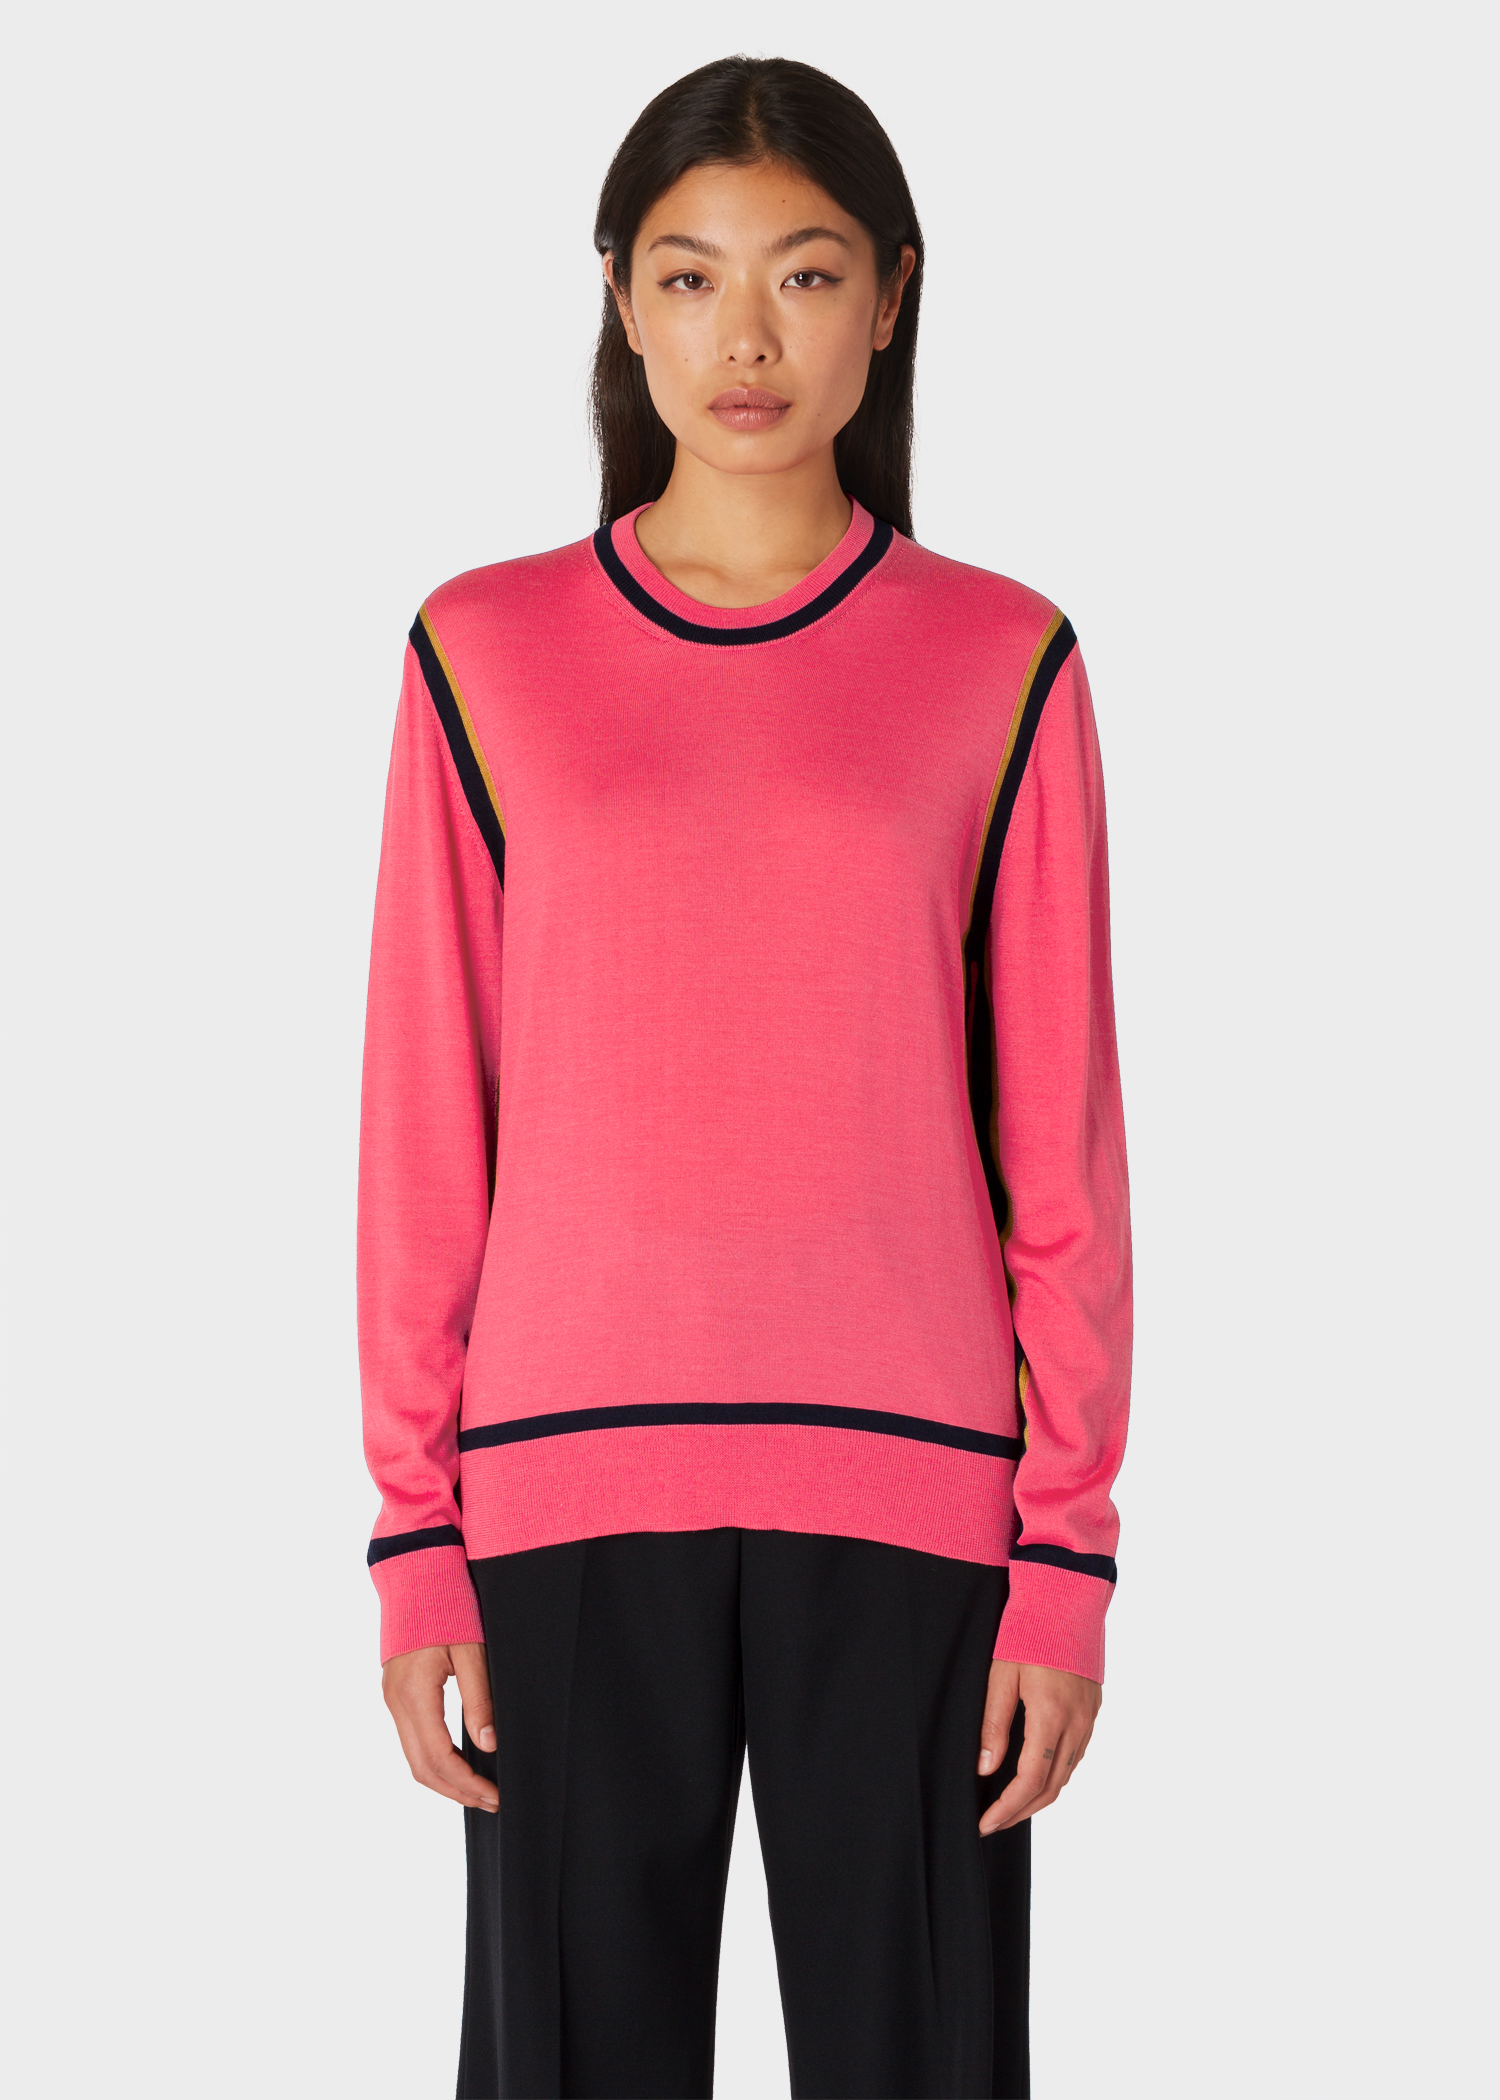 Model front close up - Women's Pink Wool And Silk Sweater With Dark Navy Trims Paul Smith